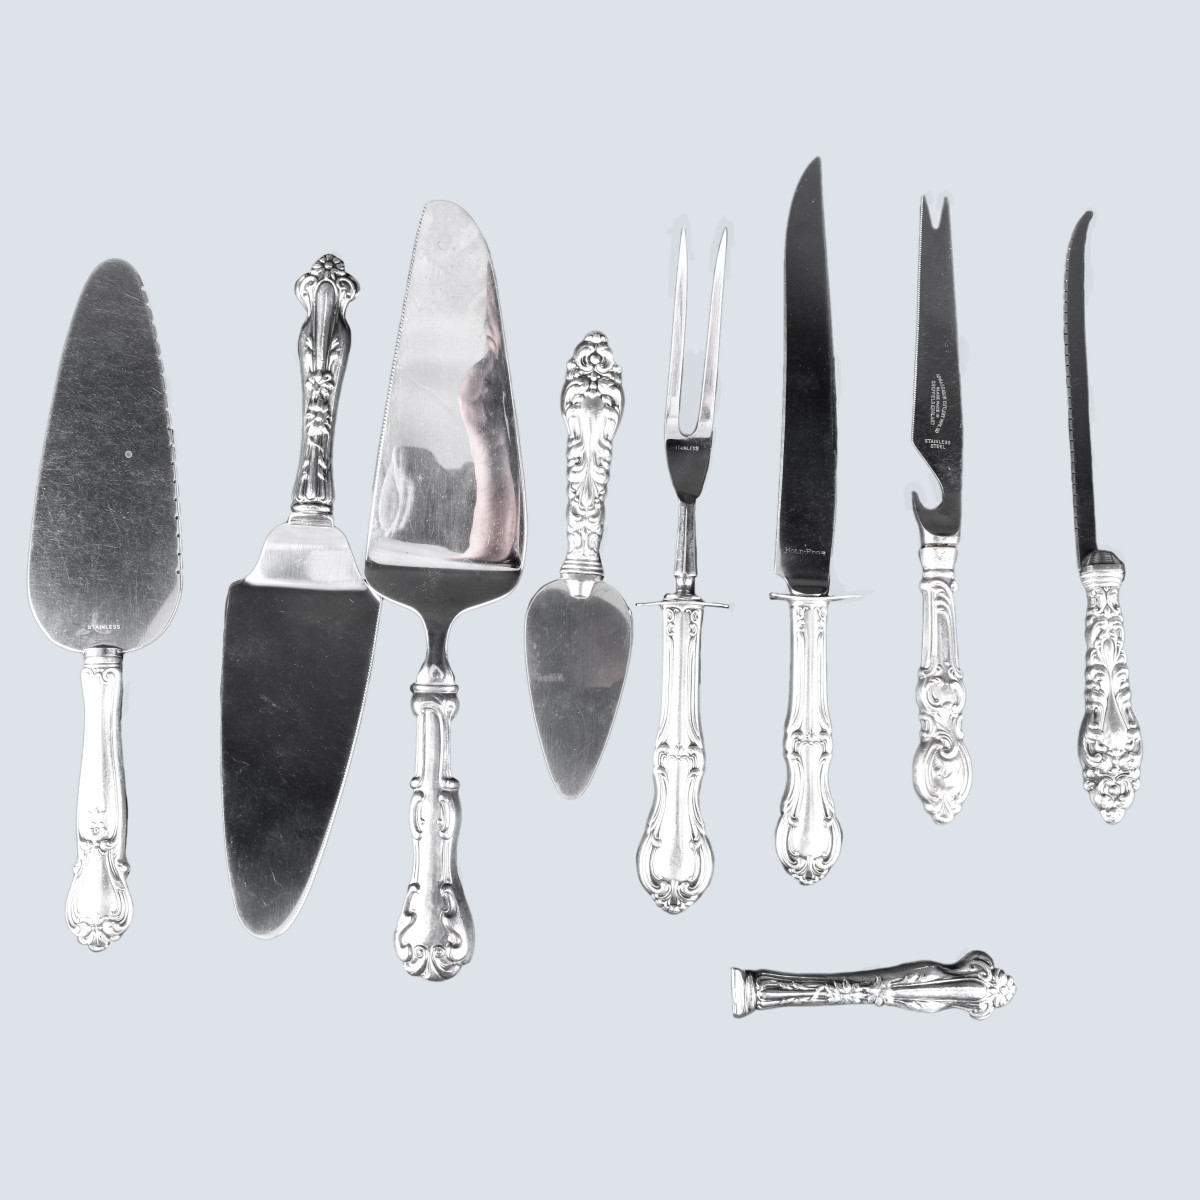 Grouping of Nine (9) Sterling Silver Handled Table